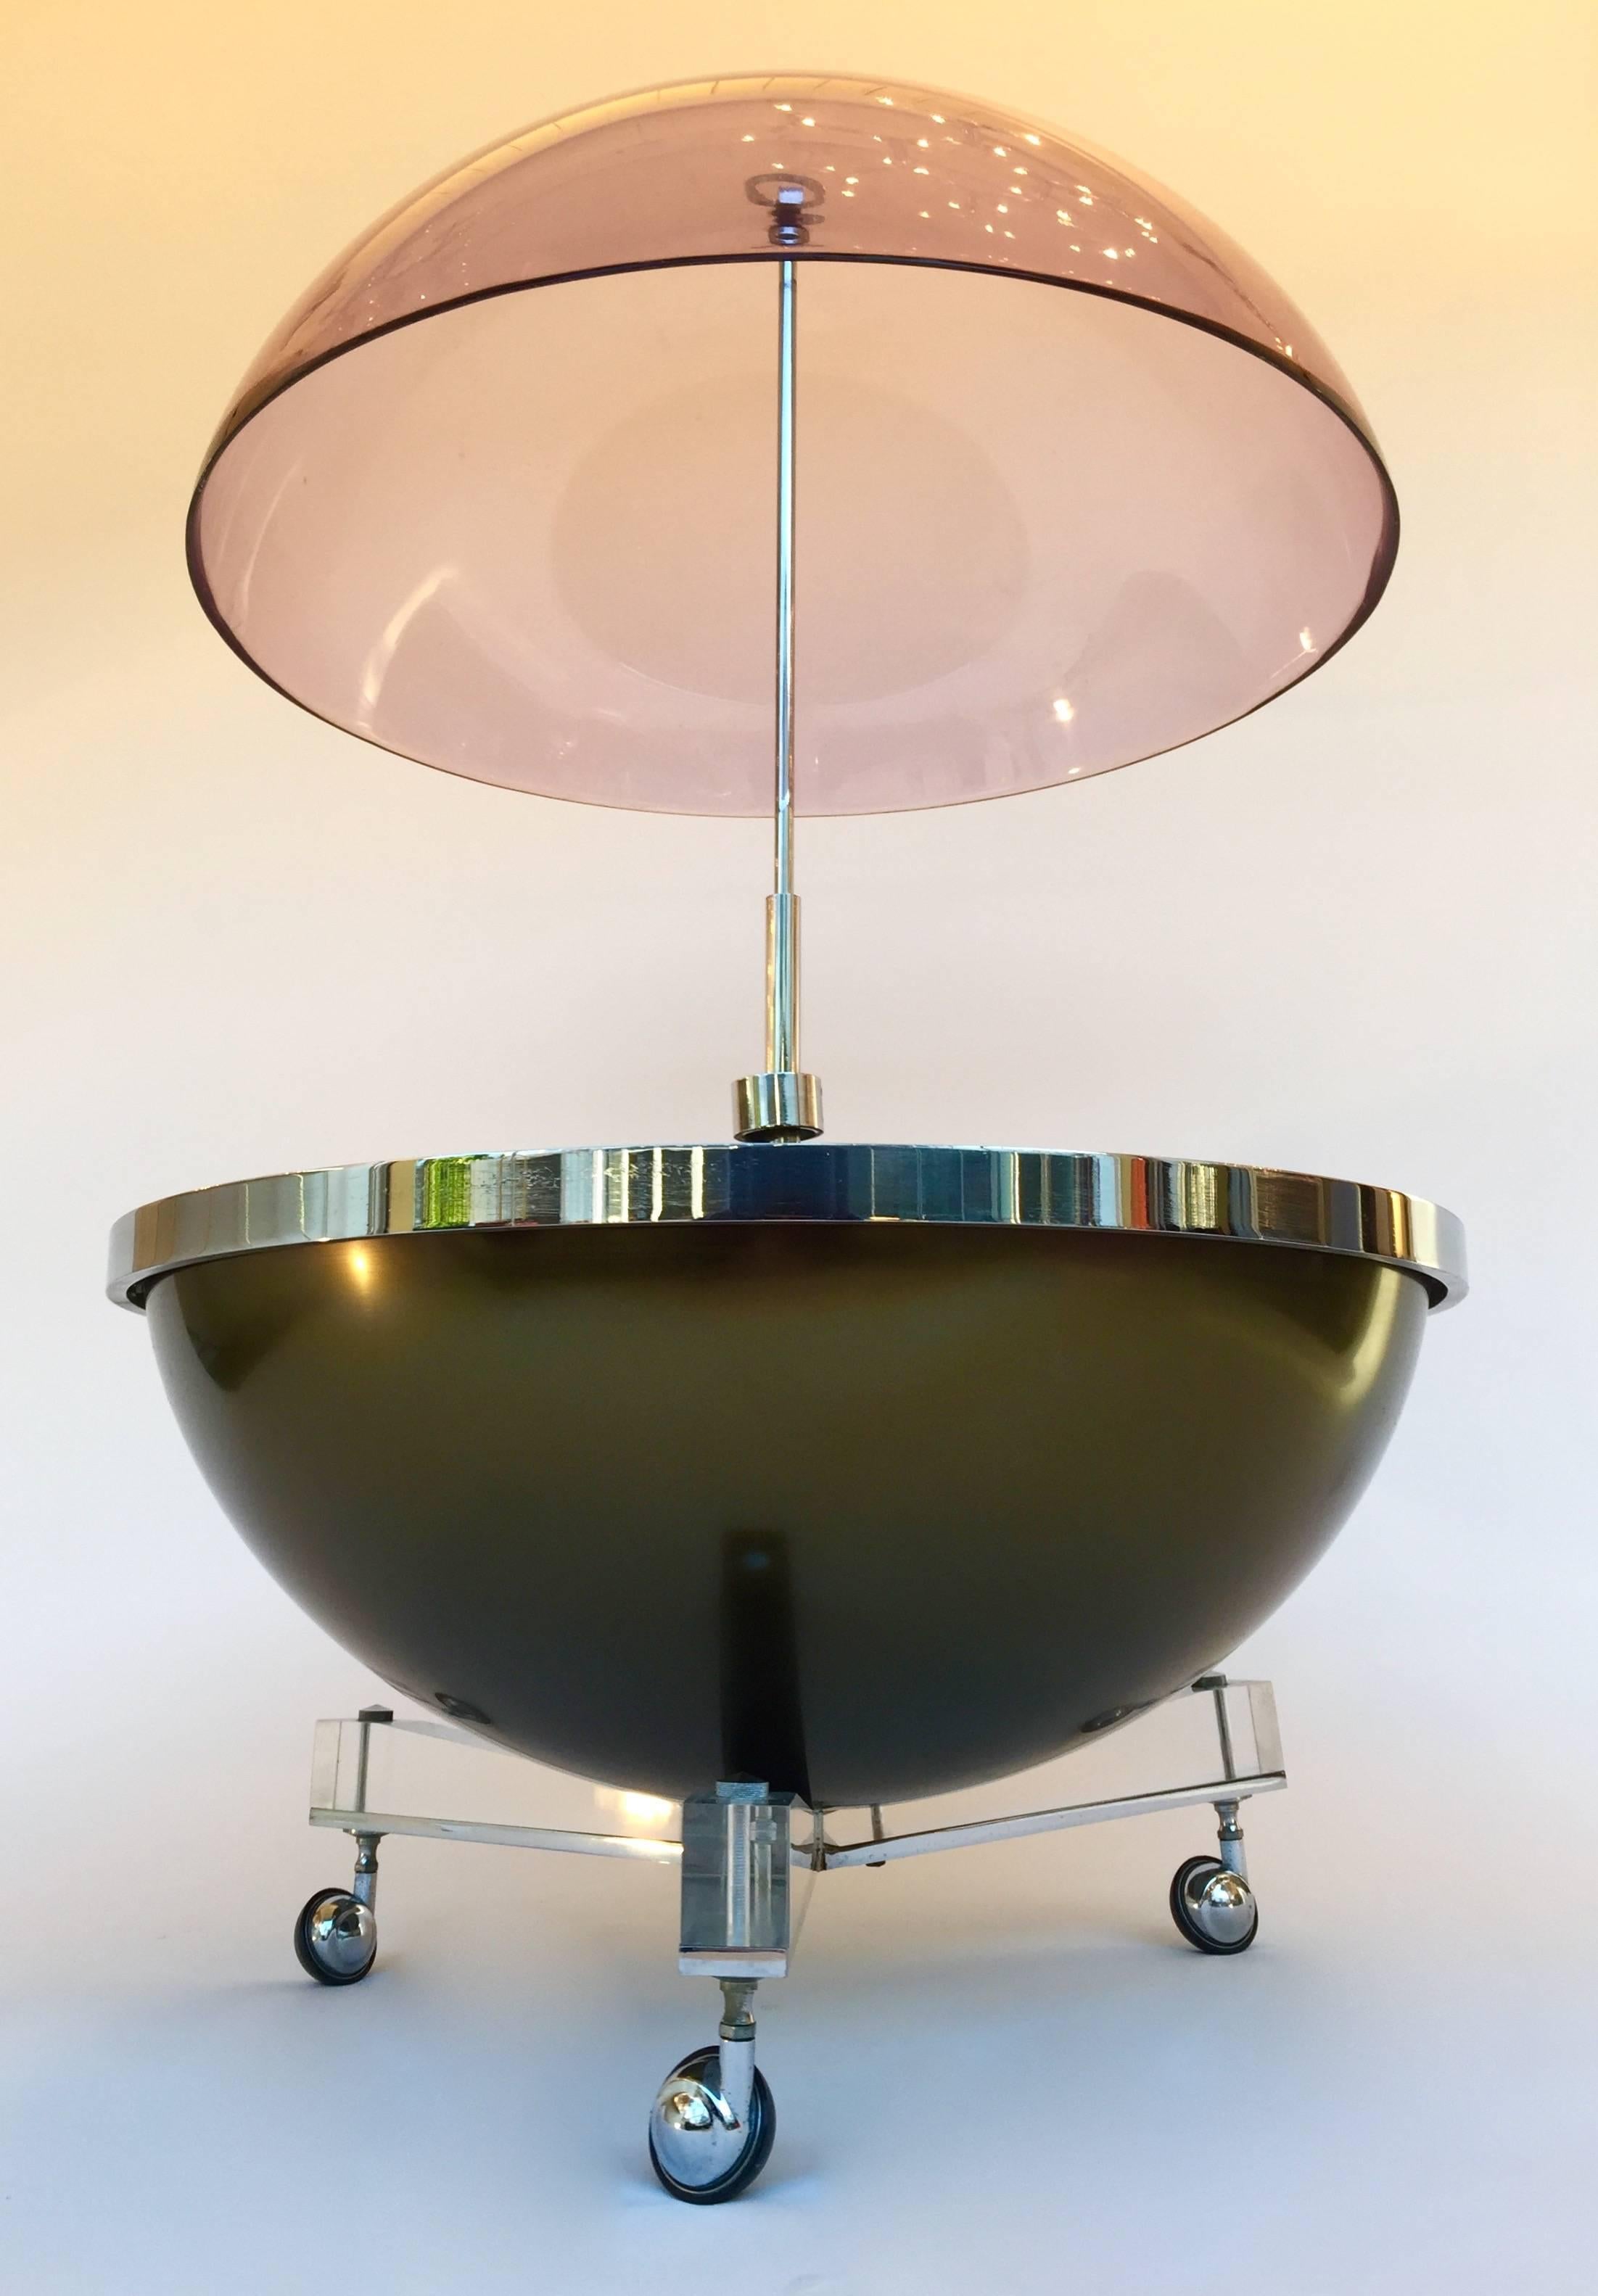 Mid-Century Modern or Space Age bar by Pierre Cardin. Top in purple smoke plexiglass, base in shine green, metal chrome circle. Typical Space Age style of the 1970s.